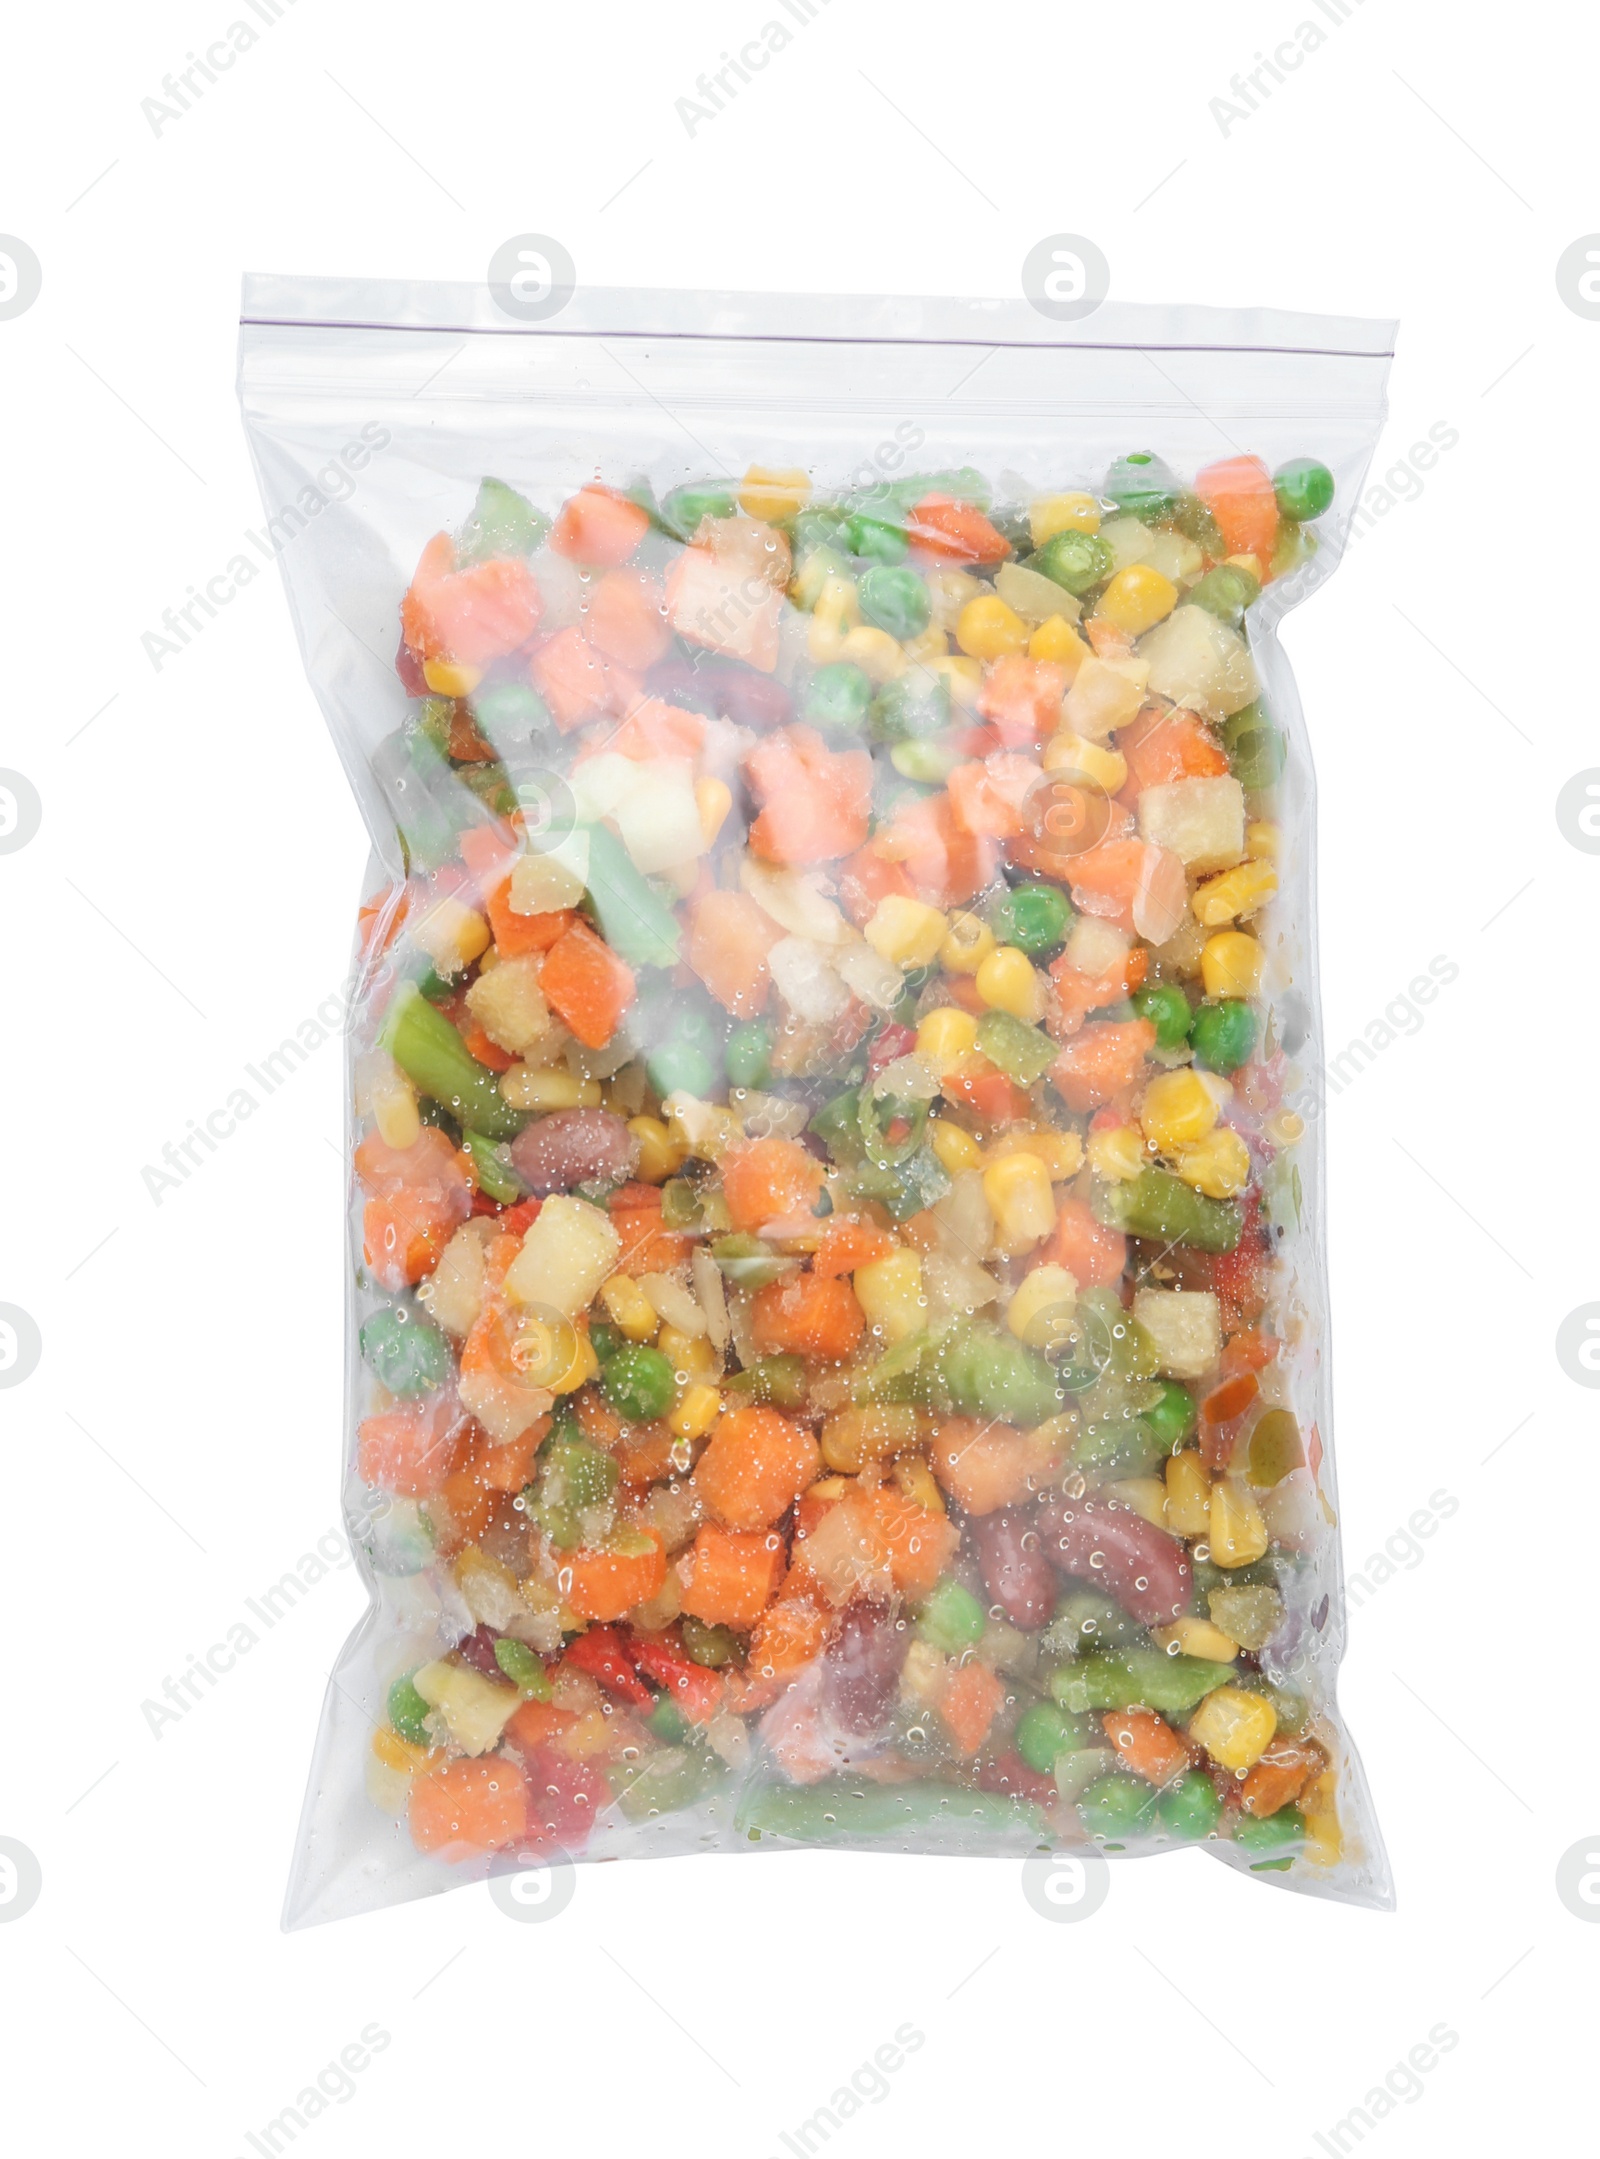 Photo of Plastic bag with frozen vegetables on white background, top view